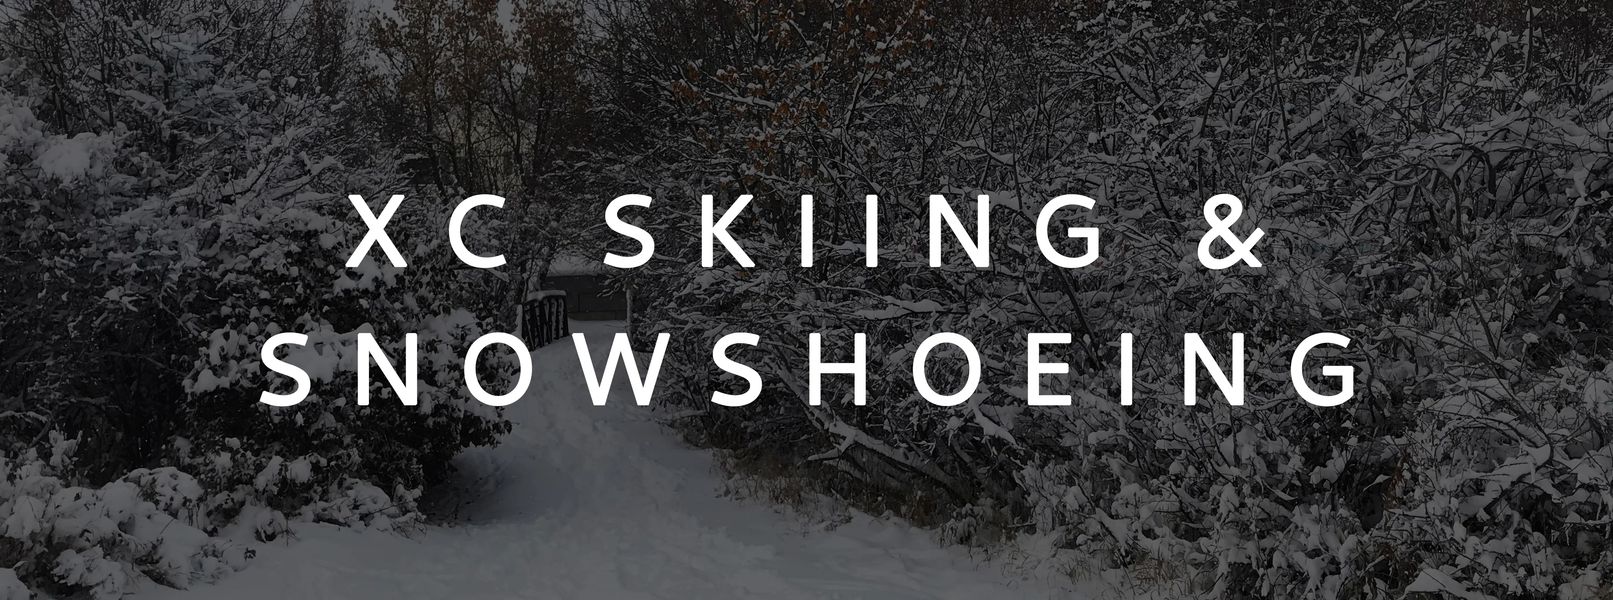 Cross-Country Skiing and Snowshoeing in Central Montana